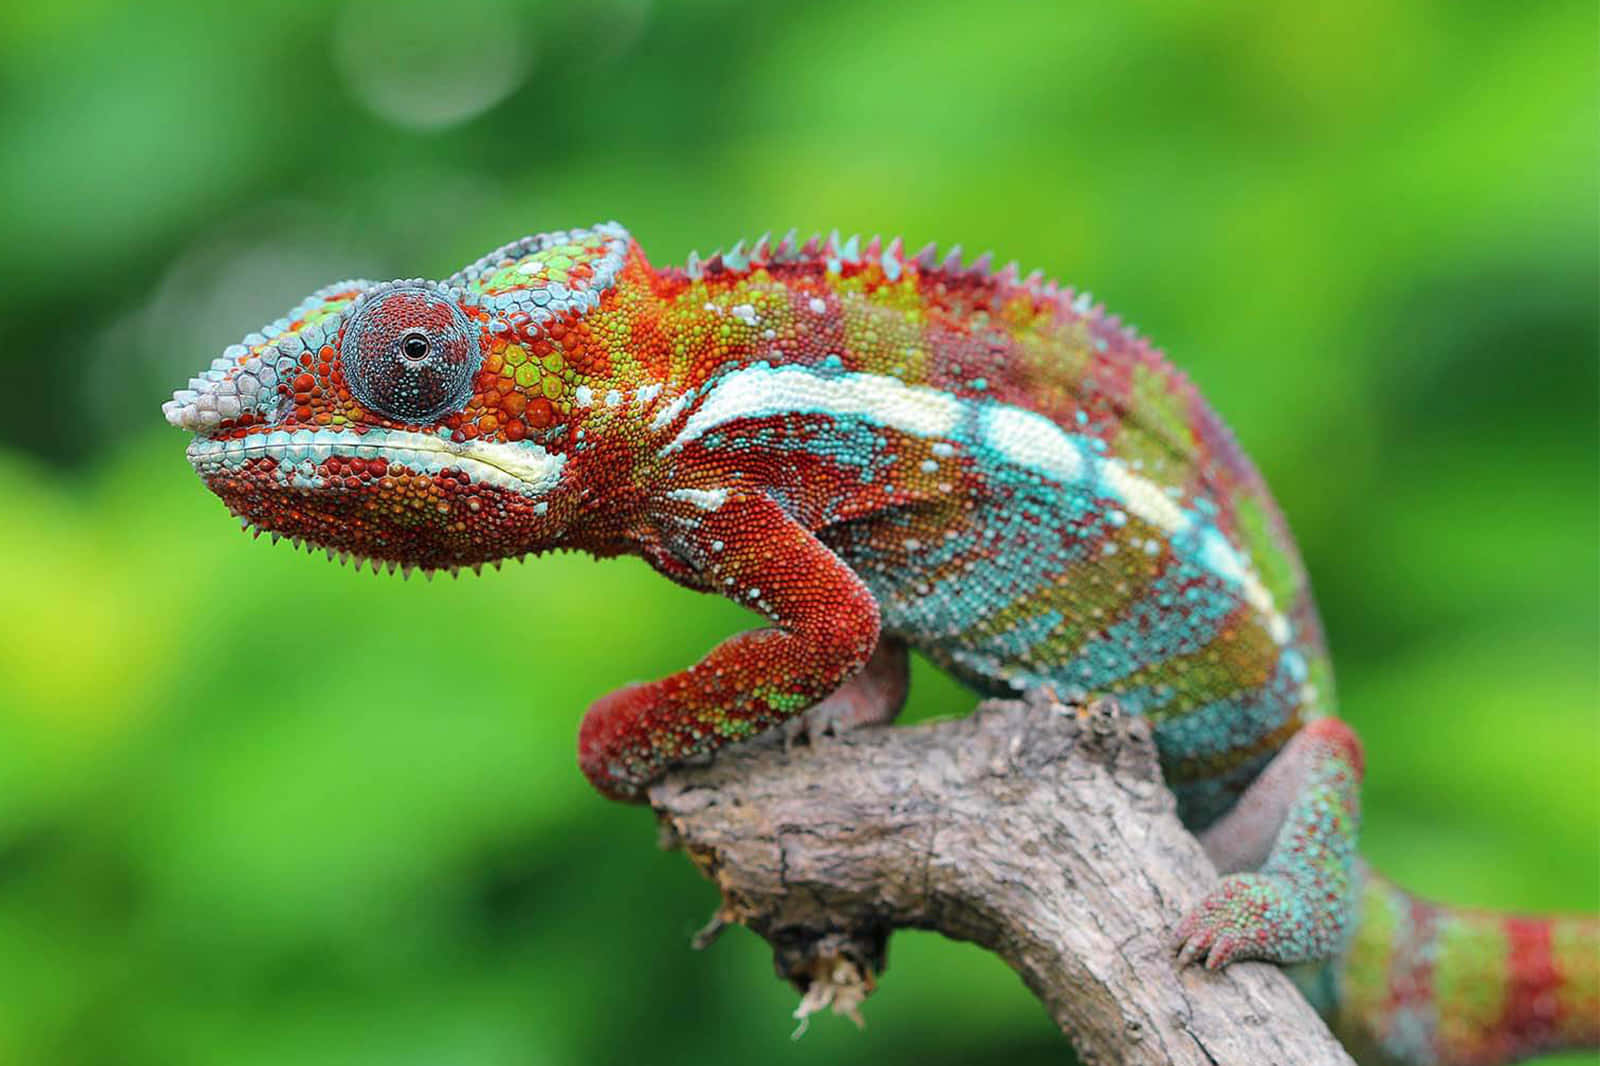 Adorable Chameleon Taking a Closer Look